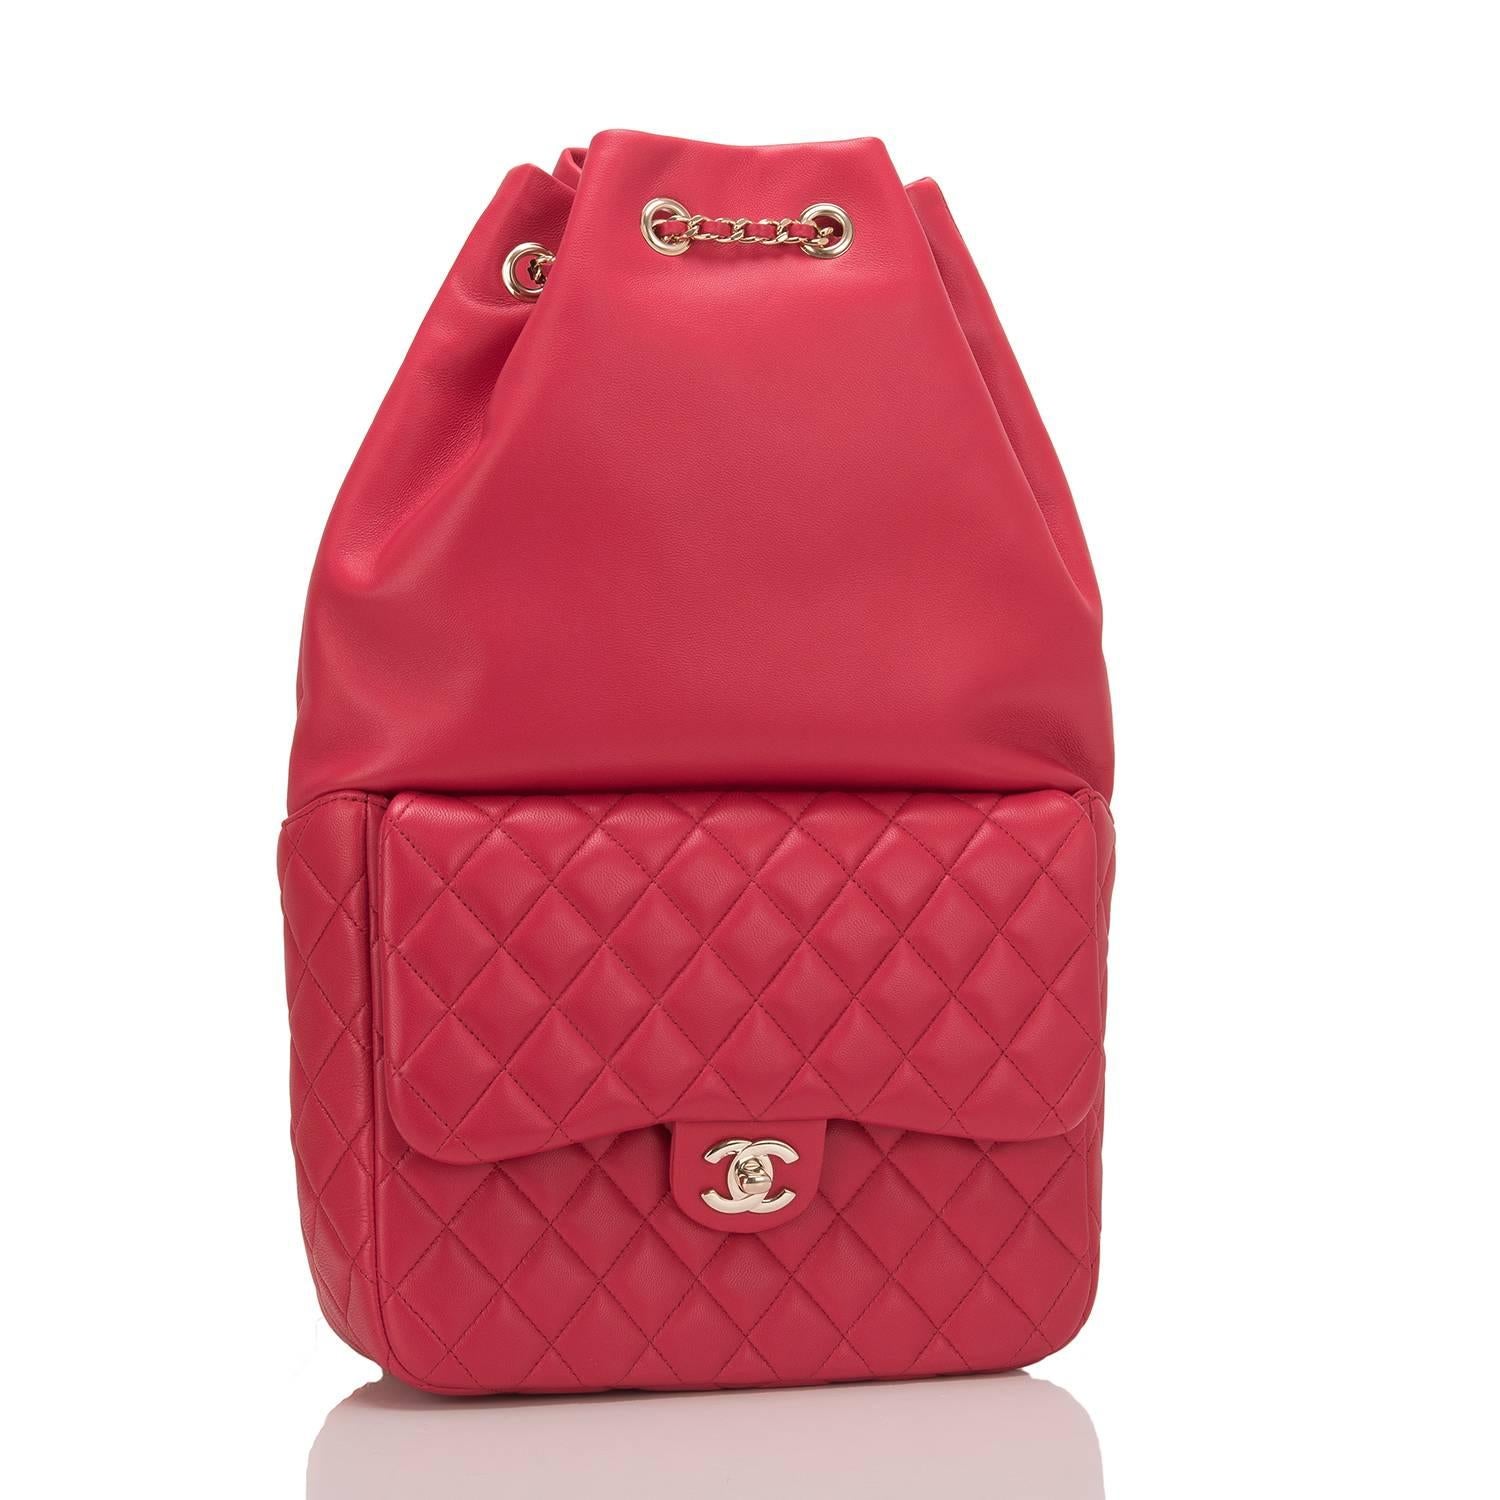 Chanel backpack of red lambskin leather with light gold tone hardware.

This bag features a front quilted leather flap pocket with a signature CC turnlock closure, a top cinch closure, and an interwoven light gold tone chain link and red leather